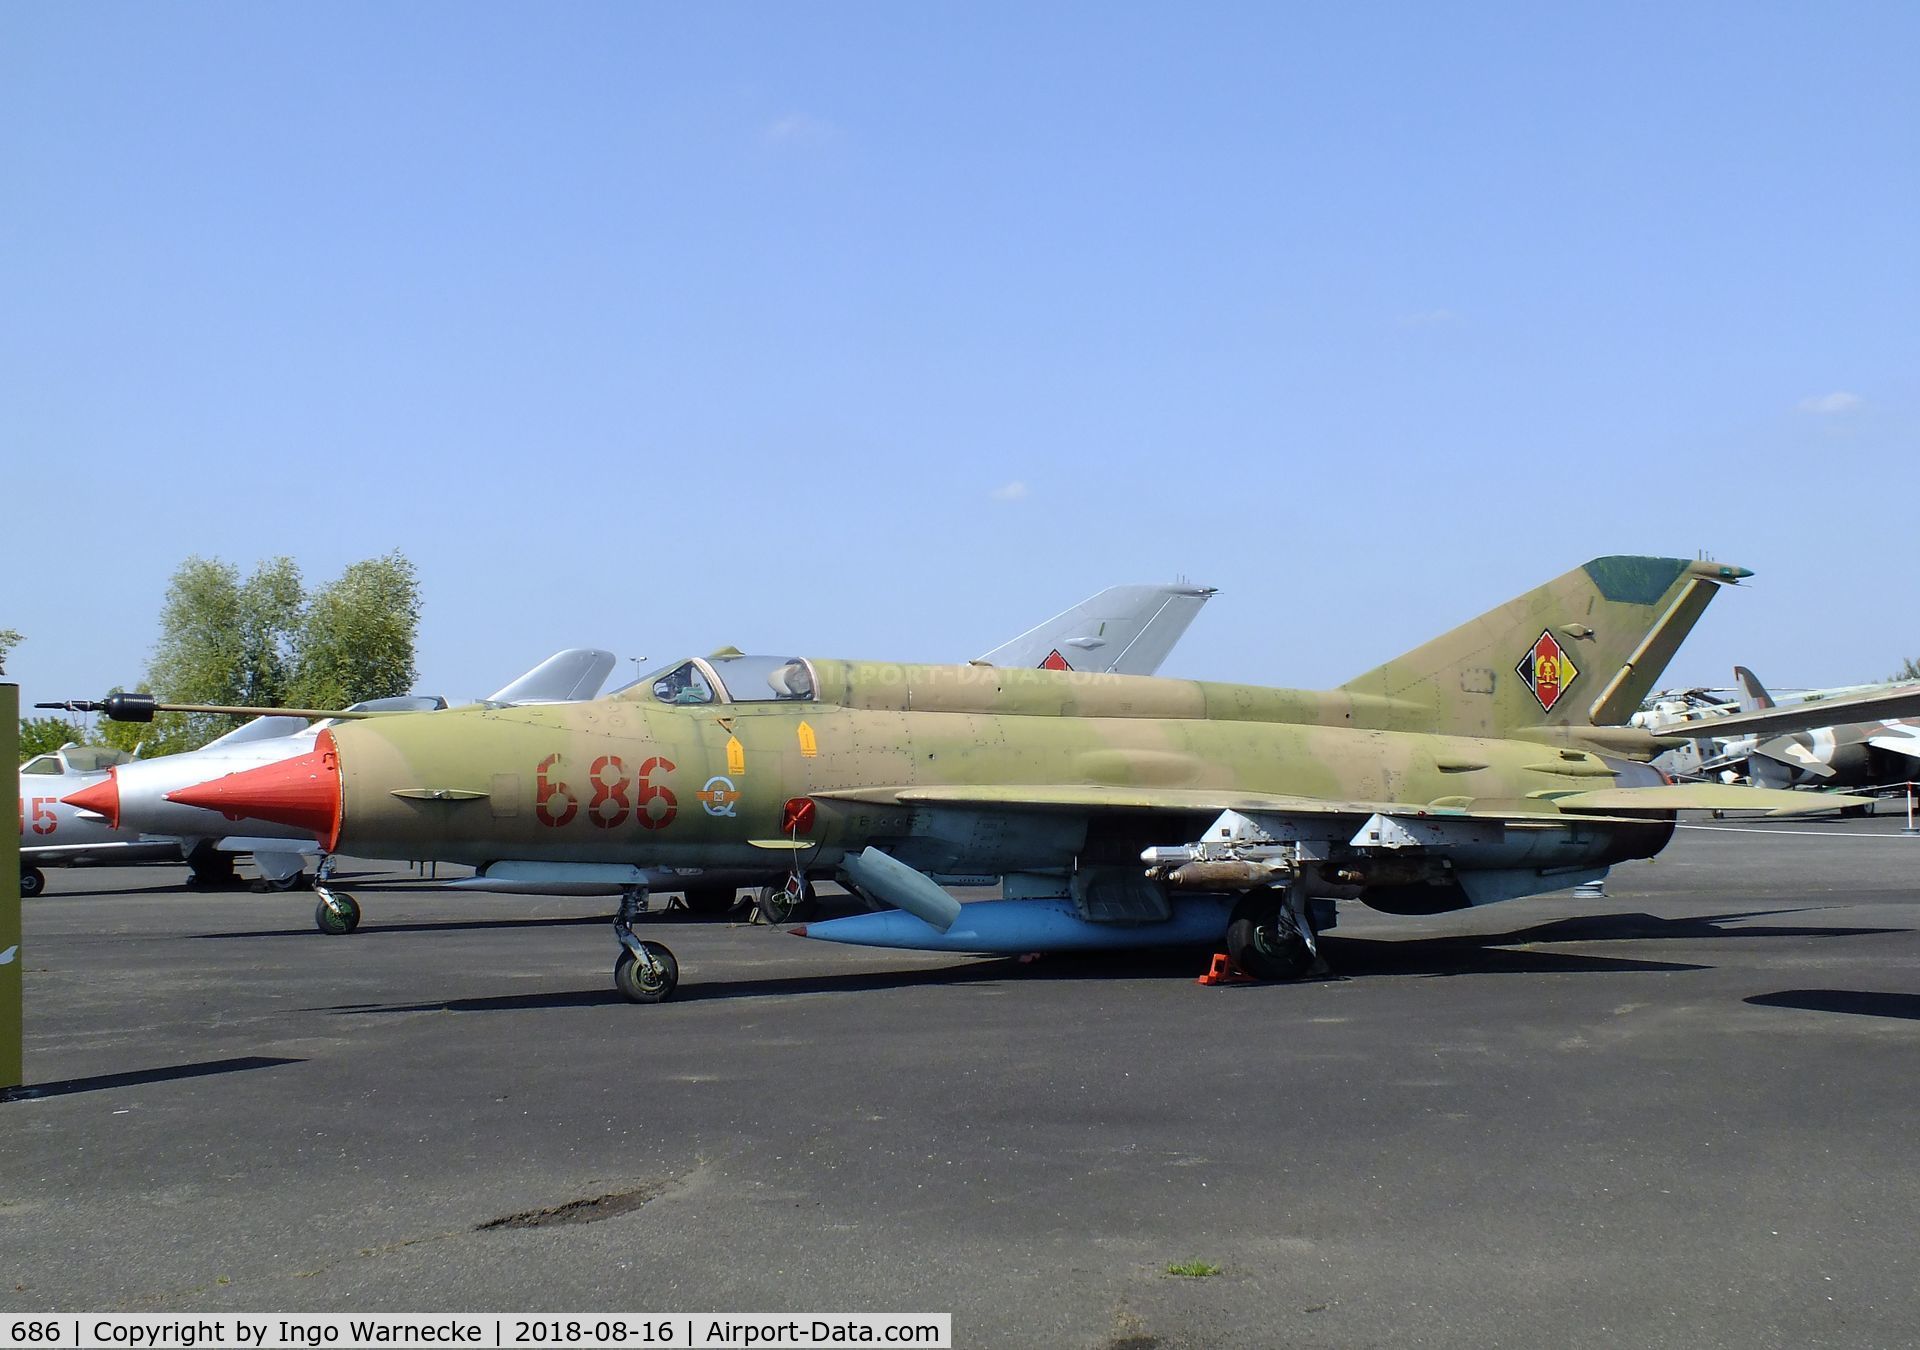 686, Mikoyan-Gurevich MiG-21MF C/N 6301, Mikoyan i Gurevich MiG-21MF FISHBED-J at the Luftwaffenmuseum (German Air Force museum), Berlin-Gatow